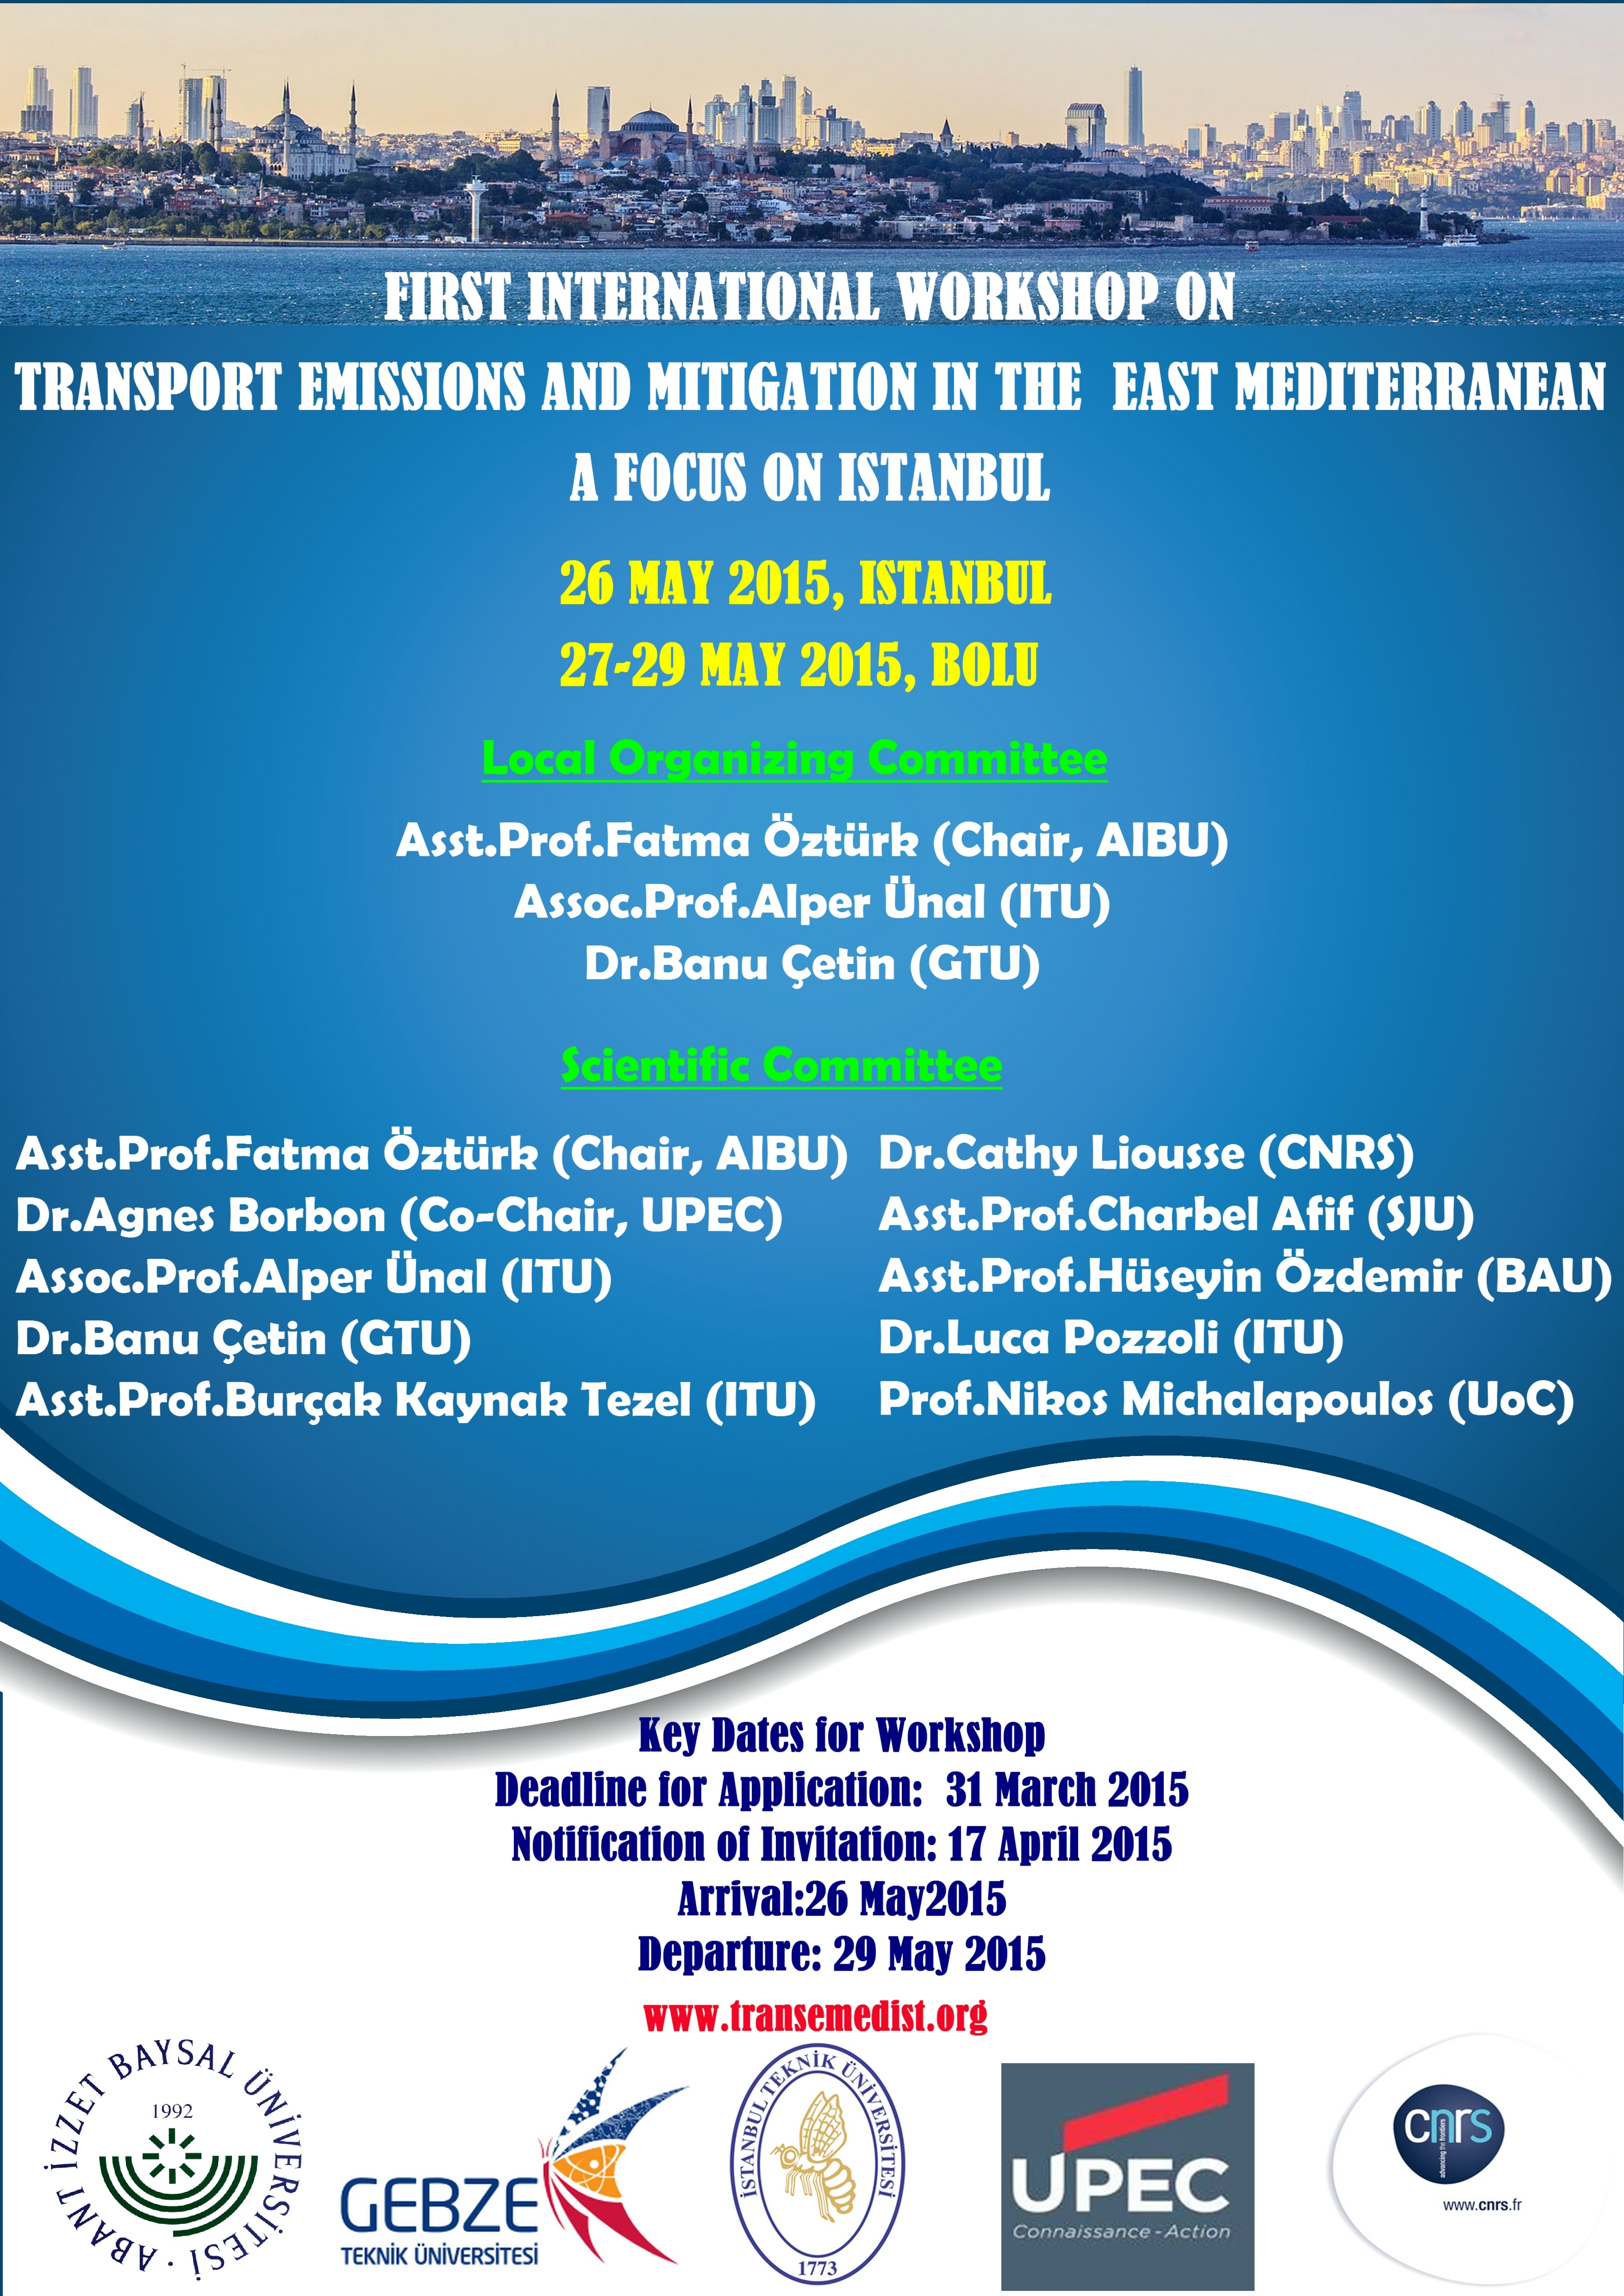 FİRST INTERNATİONAL WORKSHOP ON TRANSPORT EMİSSİONS AND MİTİGATİON İN THE EAST MEDİTERRANEAN: A FOCUS ON ISTANBUL